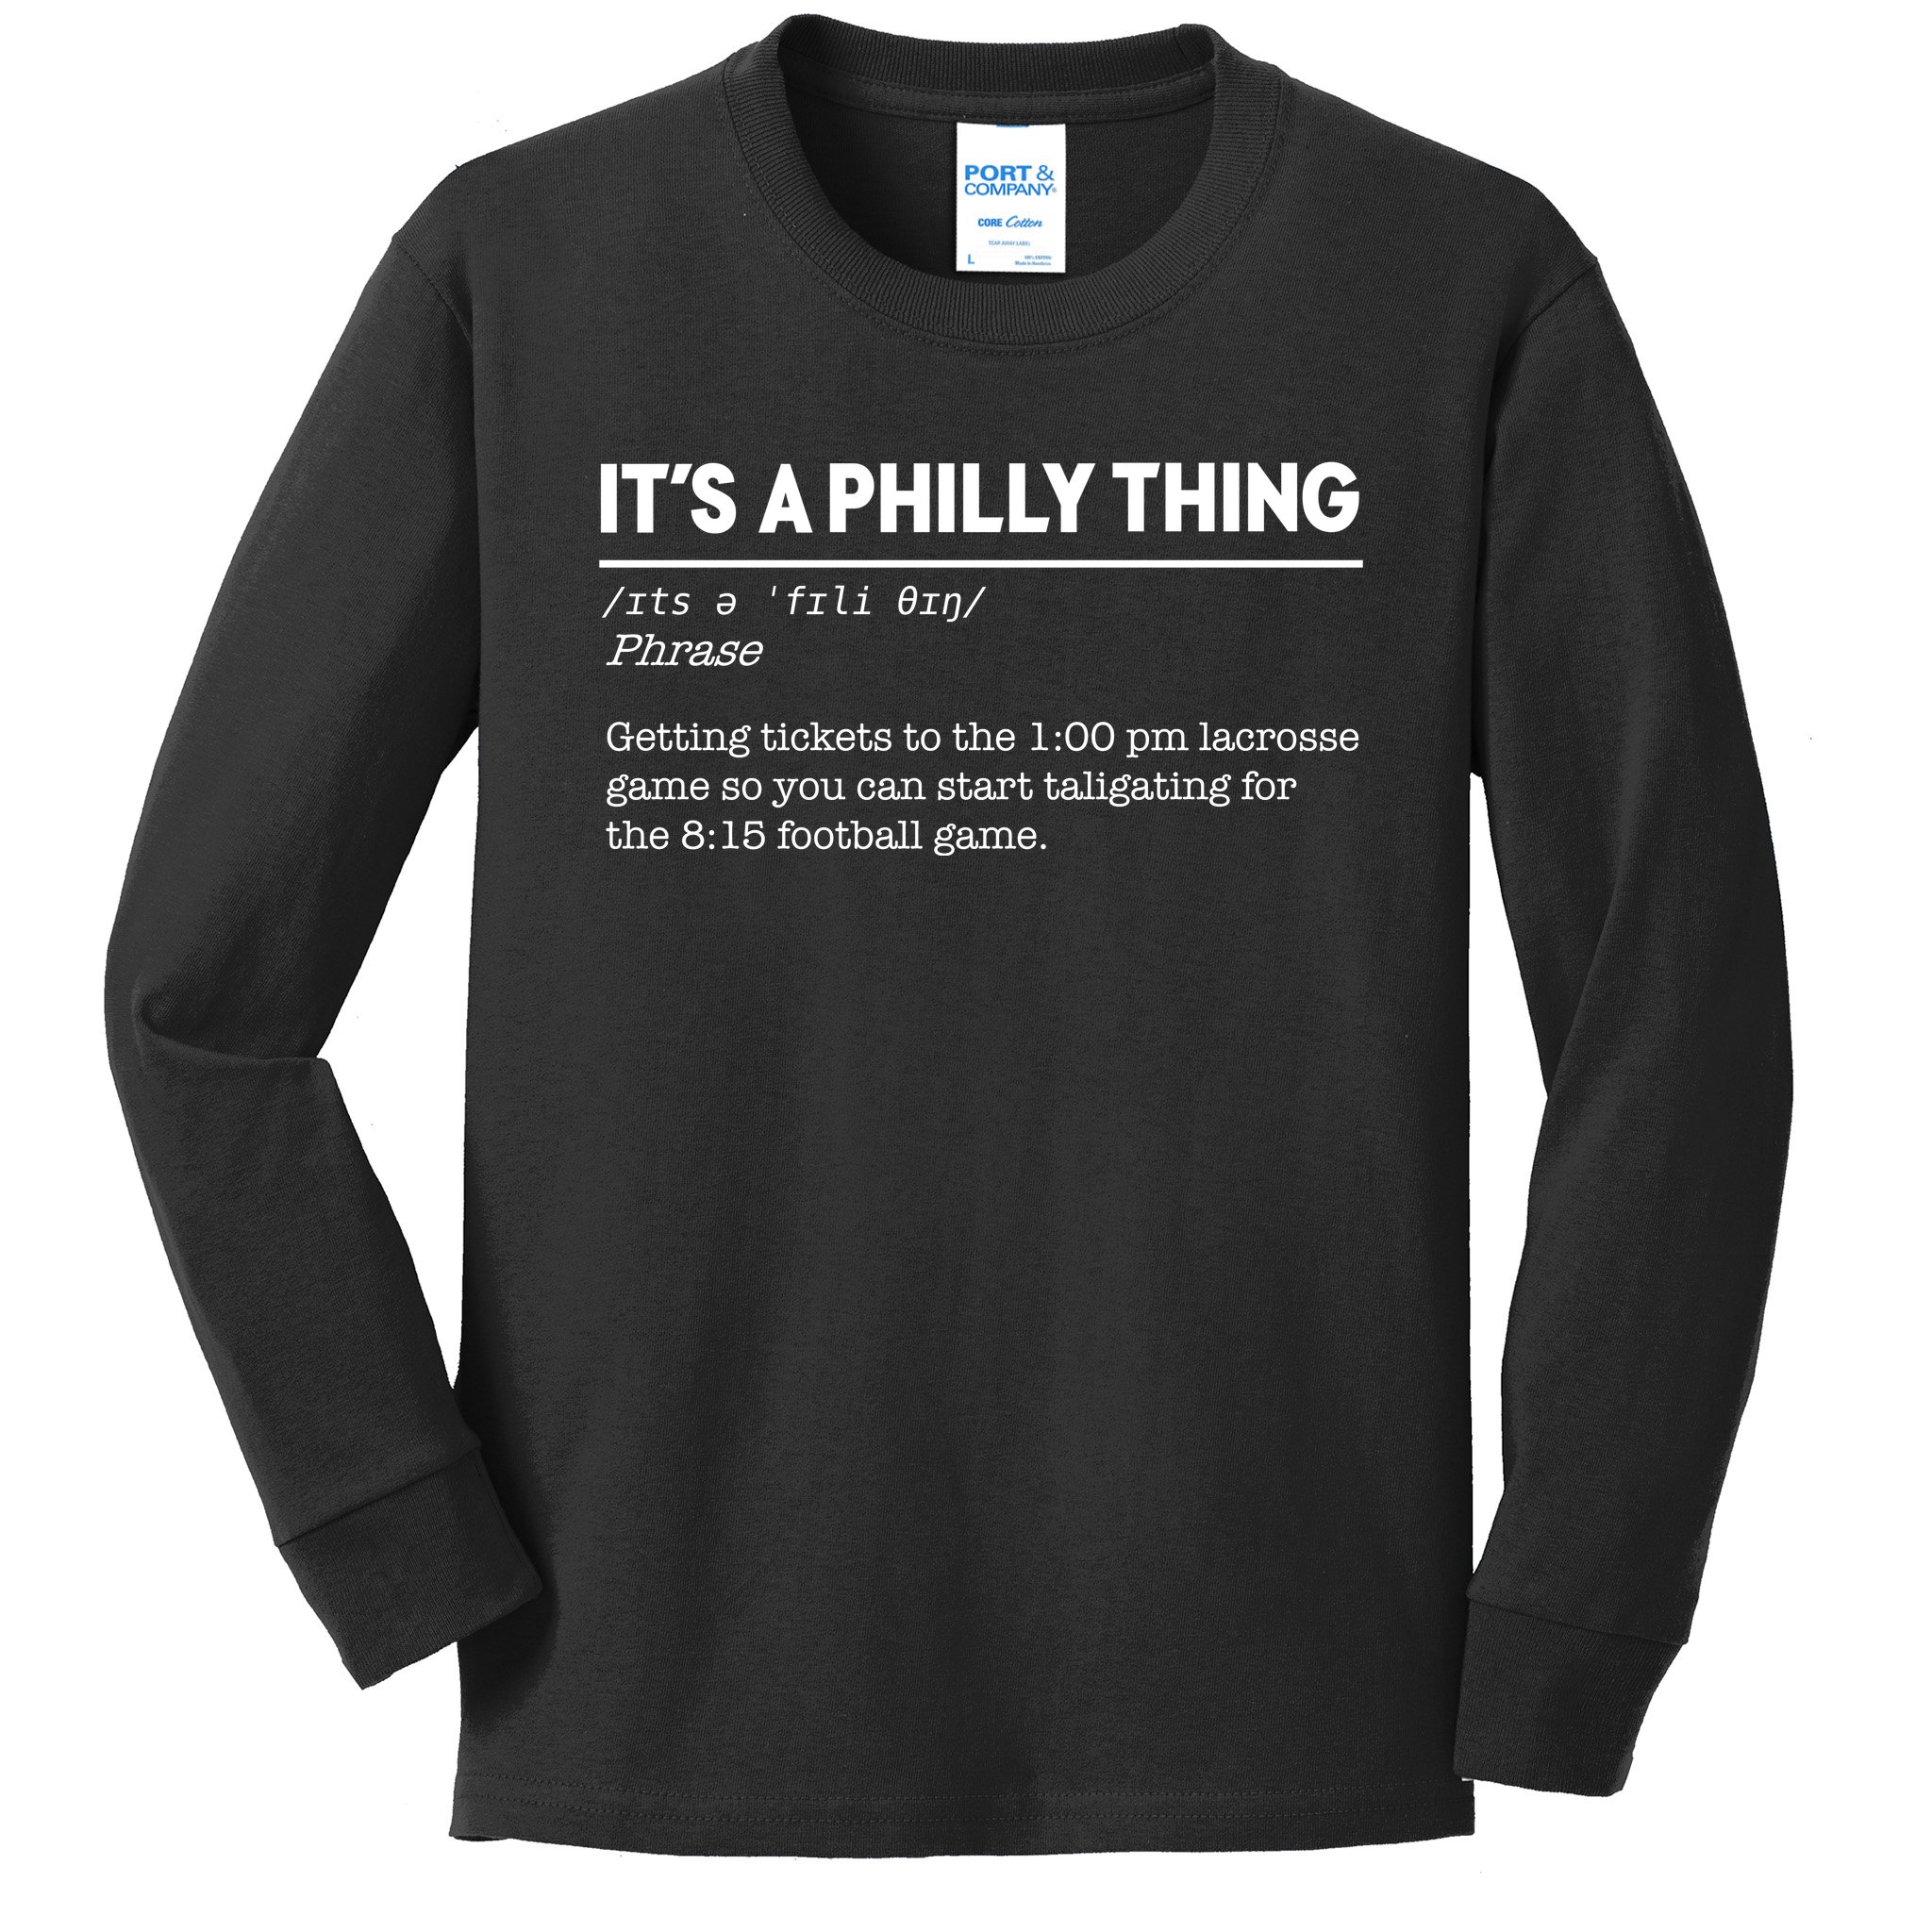 Toddler Eagles Shirt Philly Eagles Game Day Shirt Toddlers 